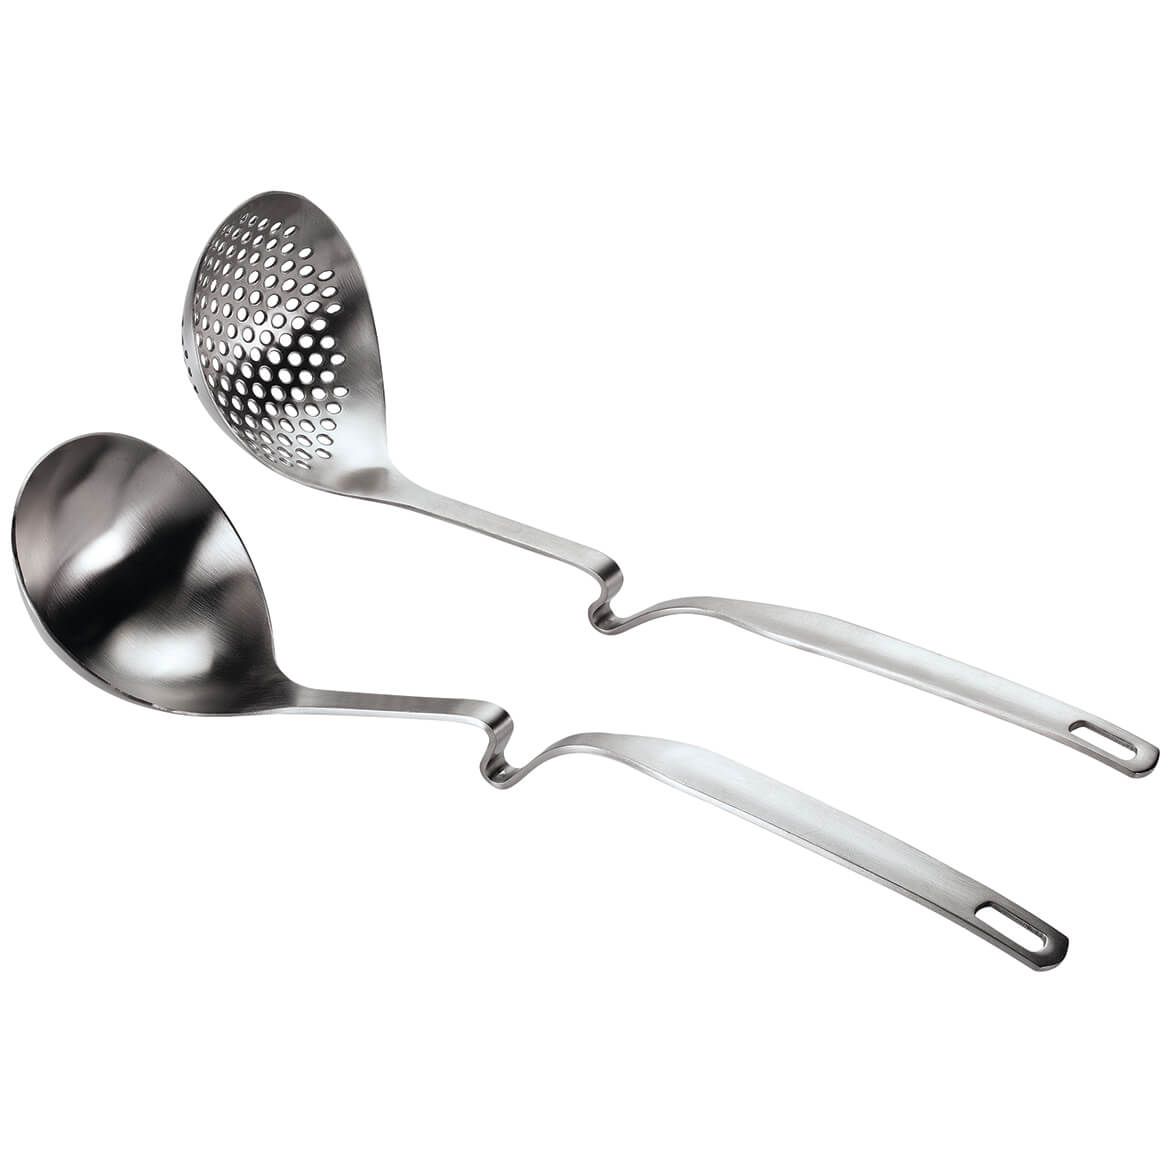 Stainless Steel Slotted Ladle and Soup Ladle with Rim Rests, Set of 2 + '-' + 372011